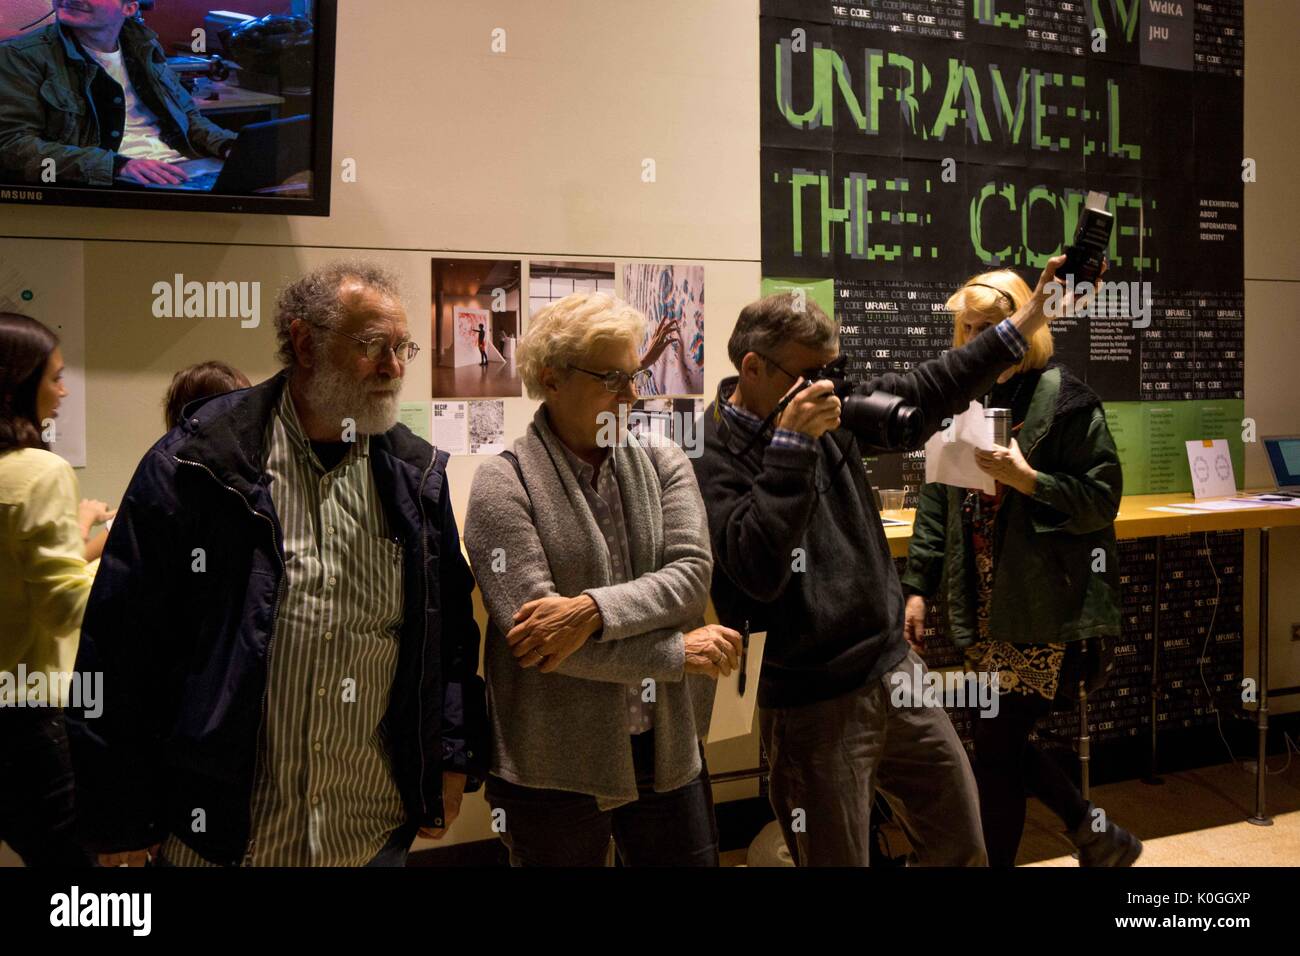 Two attendees look on at artwork not pictured while one man takes a photo of the artwork at the Unravel the Code Opening at The Johns Hopkins University Sheridan Libraries, 2016. Courtesy Eric Chen. Stock Photo